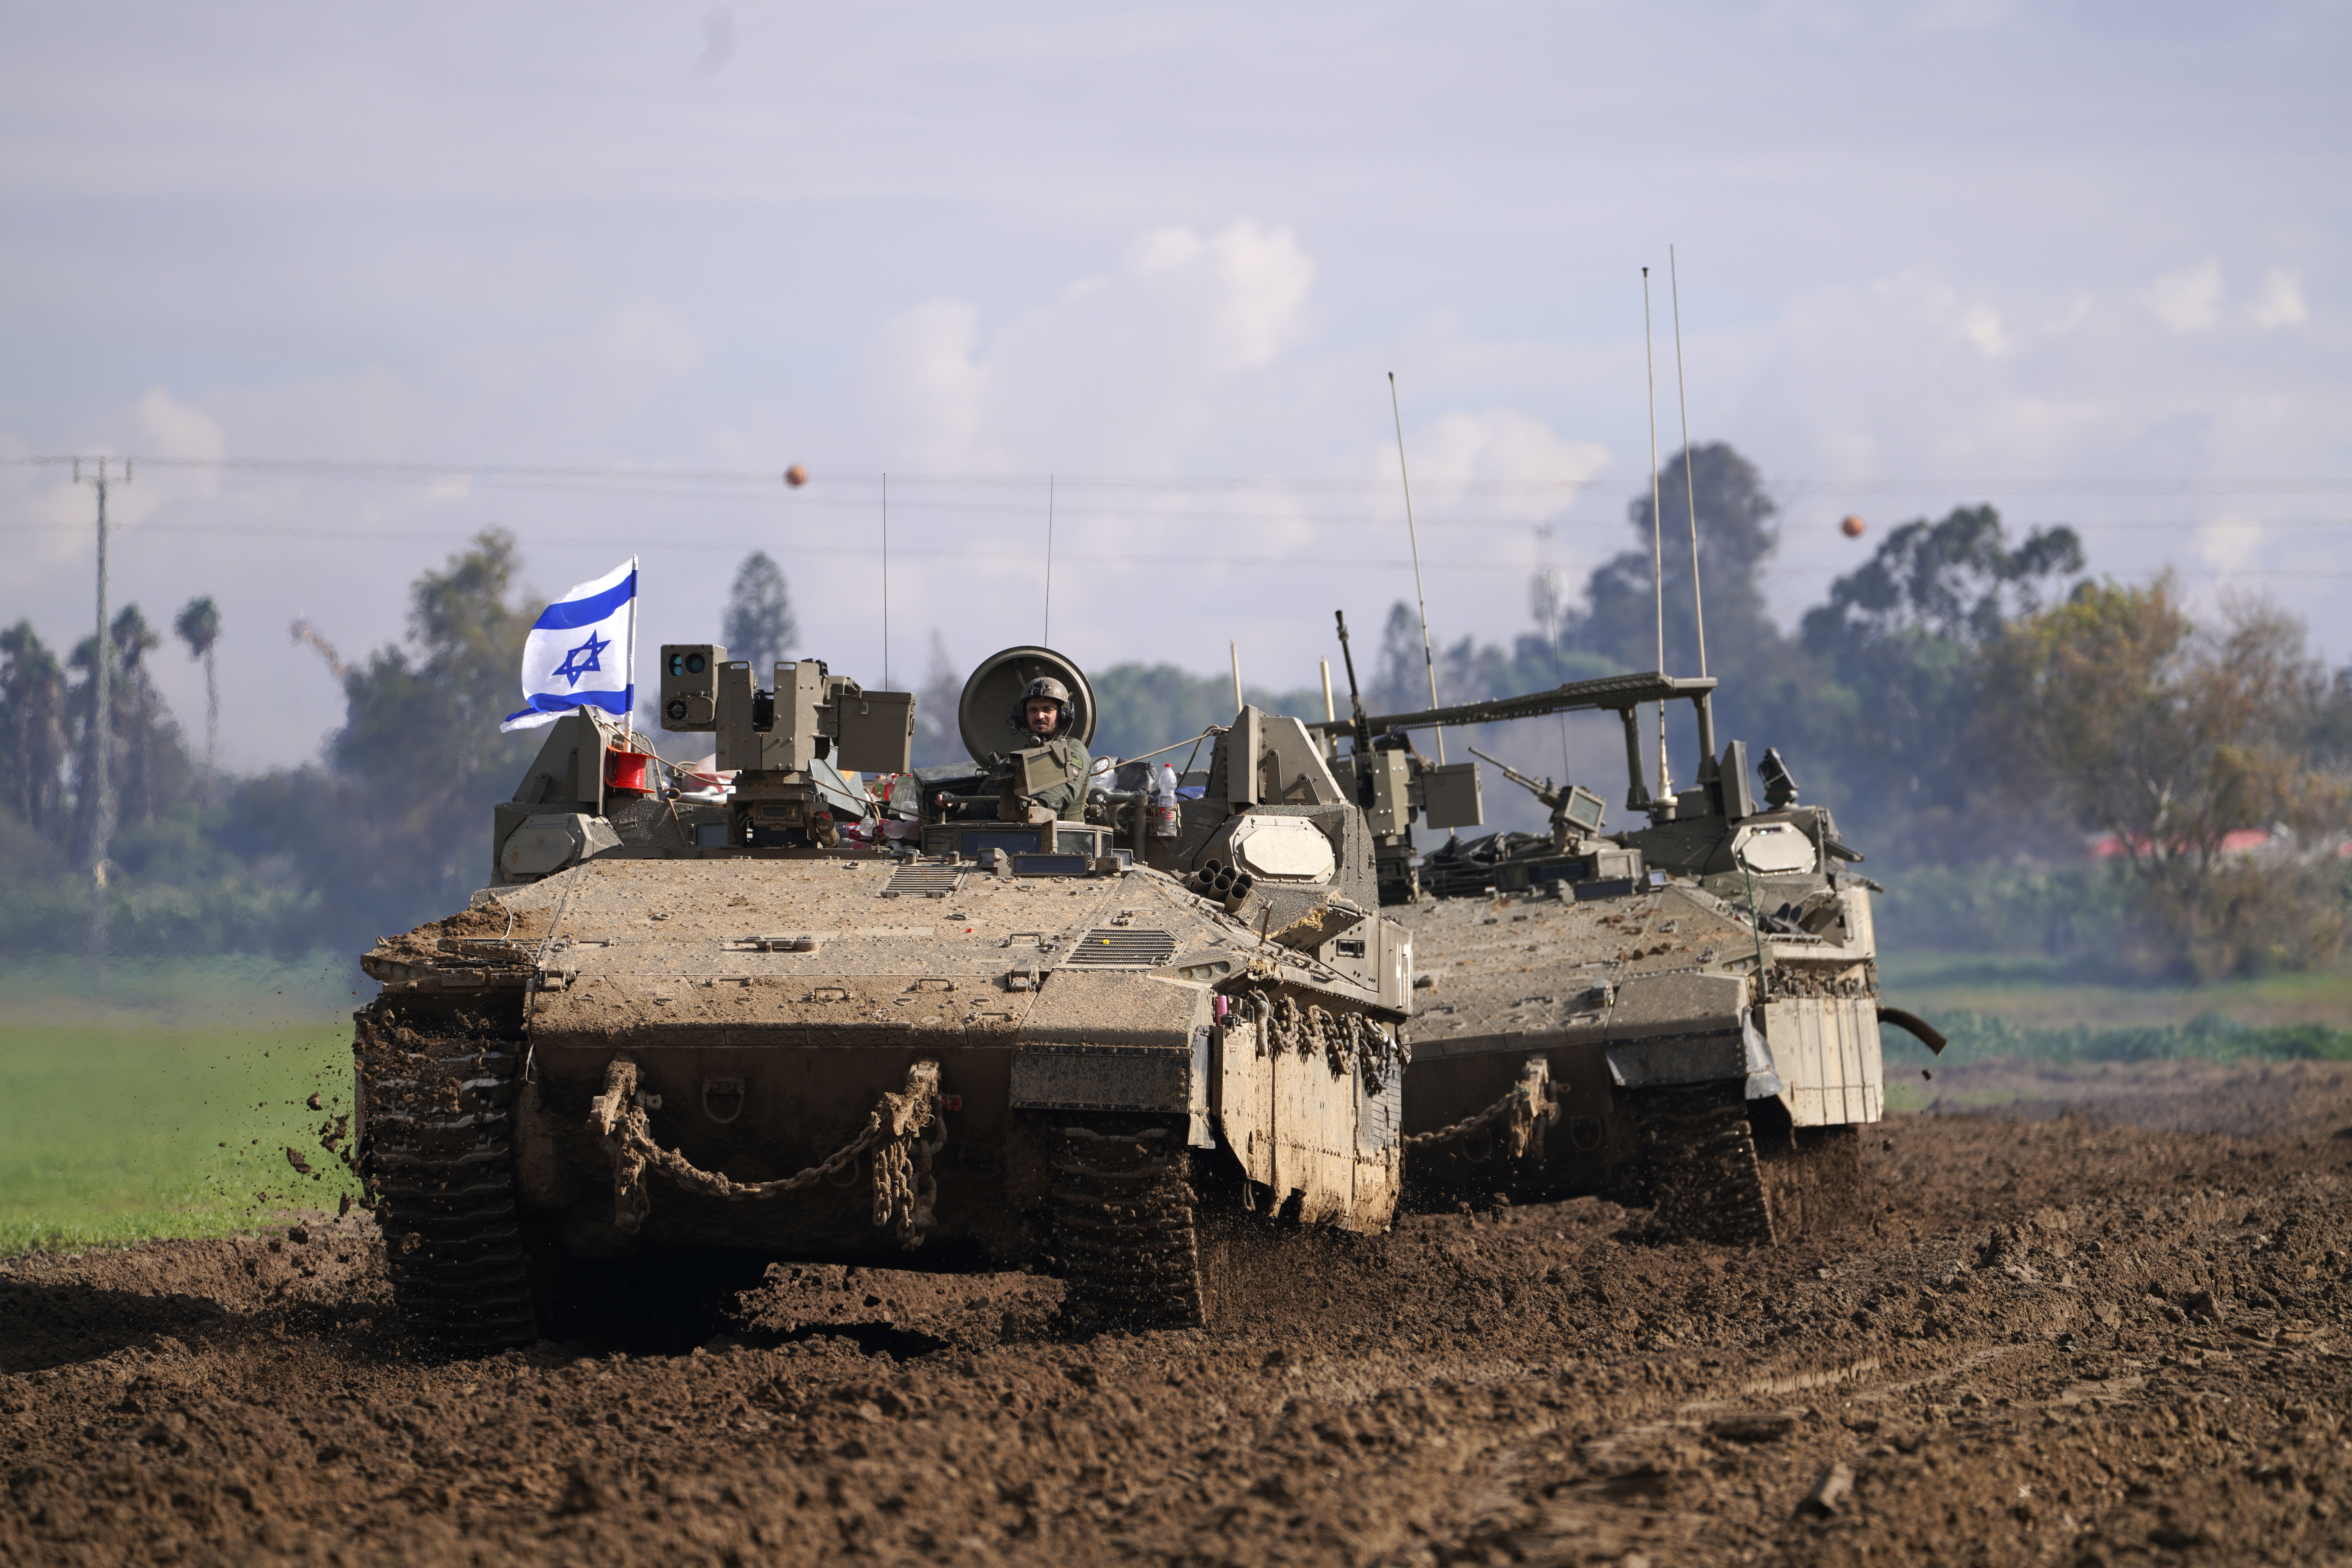 Hamas Shows Signs of Resurgence in Parts of Gaza Where Israeli Troops Have Largely Withdrawn